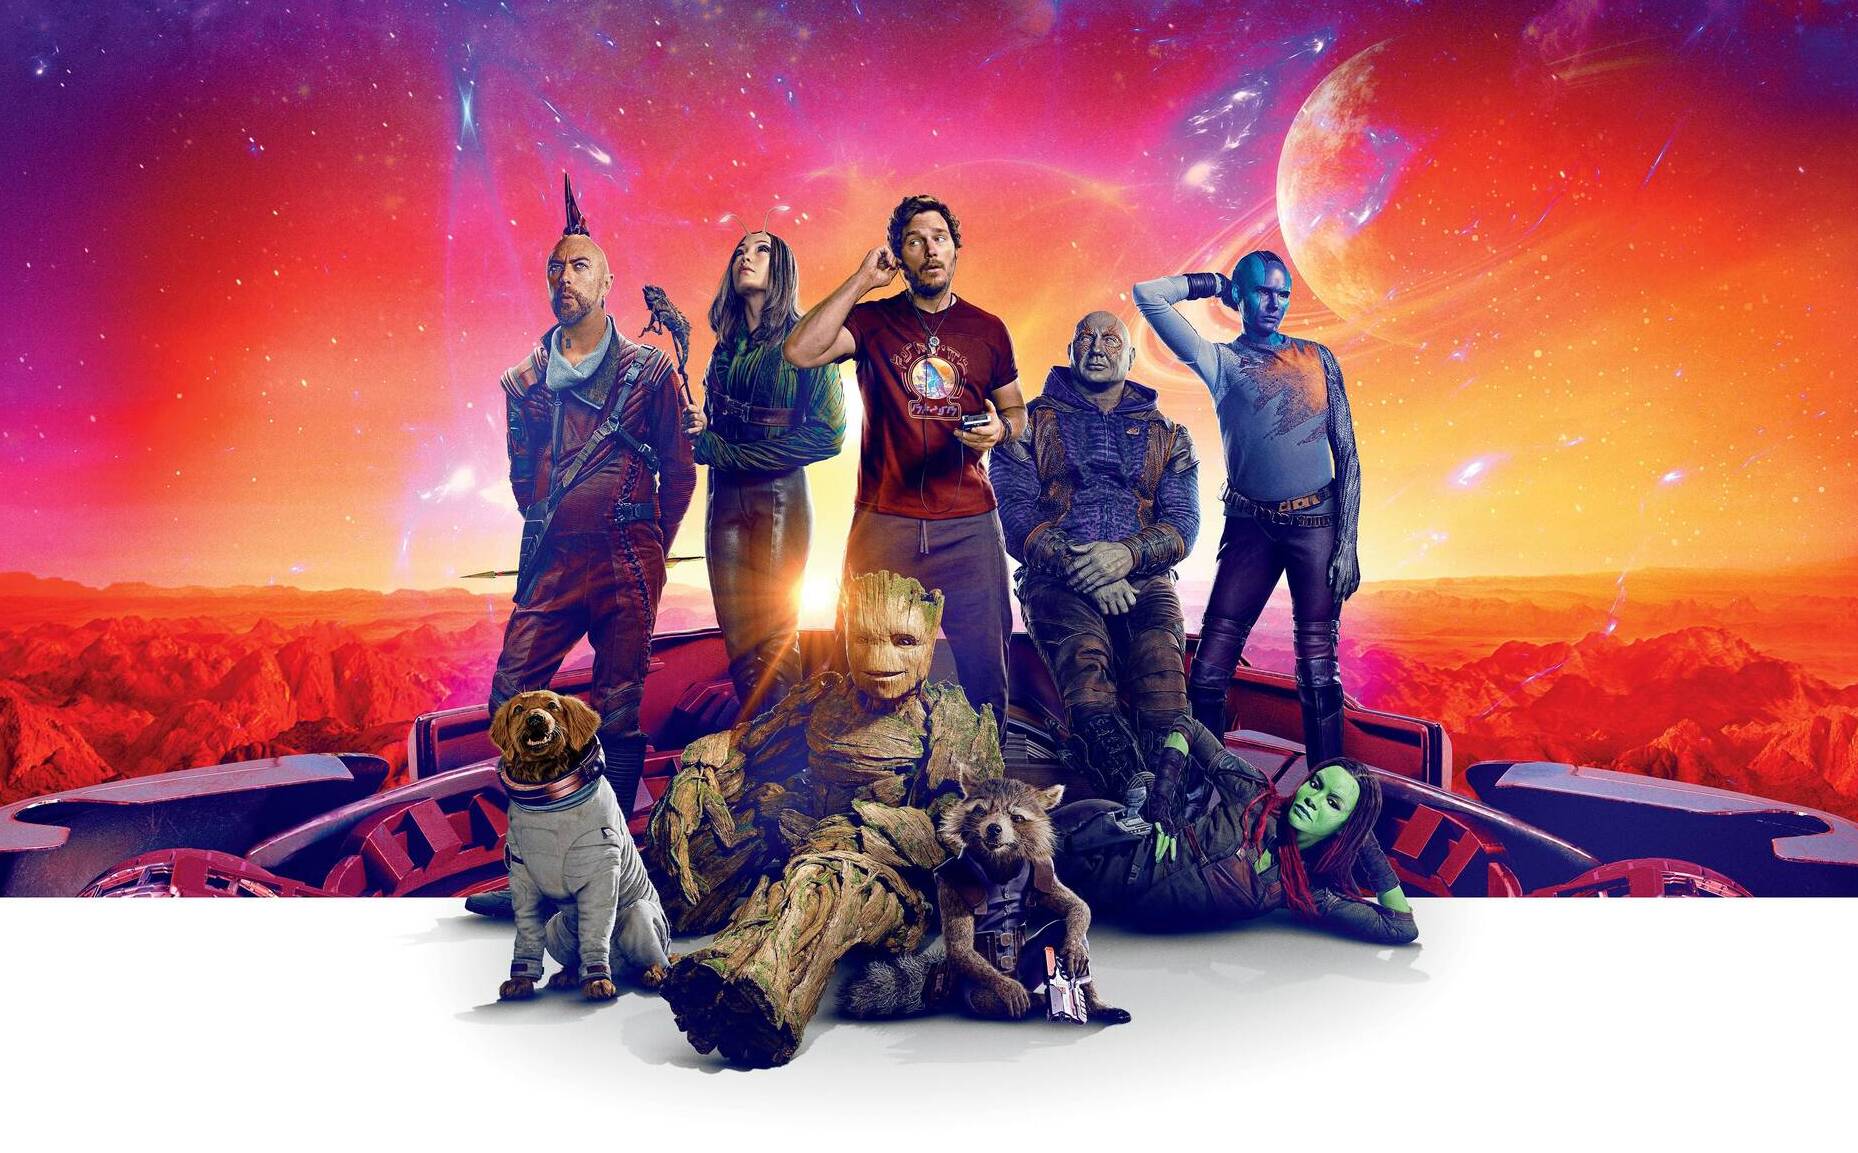 <p>It took a while, for a multitude of reasons, but eventually, we got “Guardians of the Galaxy Vol. 3.” Would time diminish the series? Would the movie prove a fitting sendoff? Would it truly be a sendoff? There is a lot to unpack in terms of the production of “Guardians of the Galaxy Vol. 3.” Here are 20 facts you might not know about the film that finished out the “Guardians” trilogy. Cue the mixtape!</p>